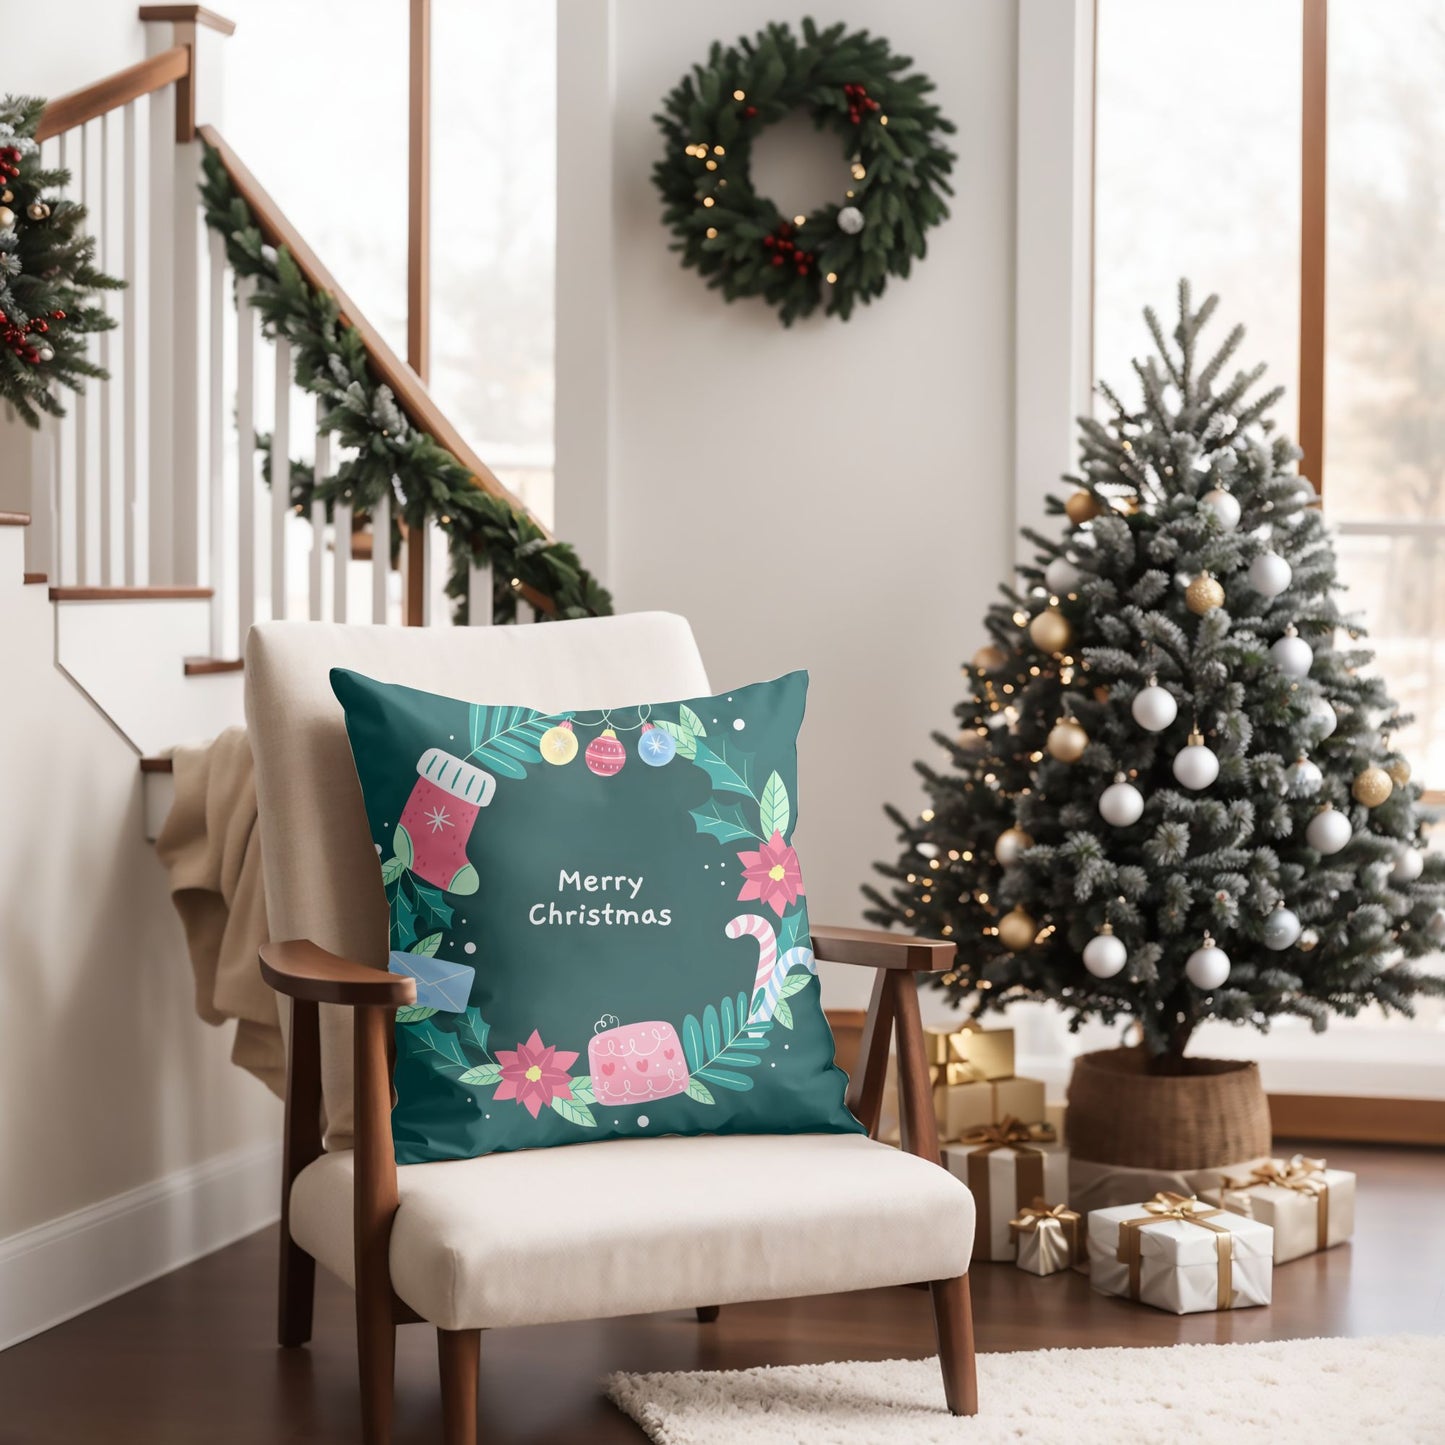 Greet your guests with a cheerful holiday pillow